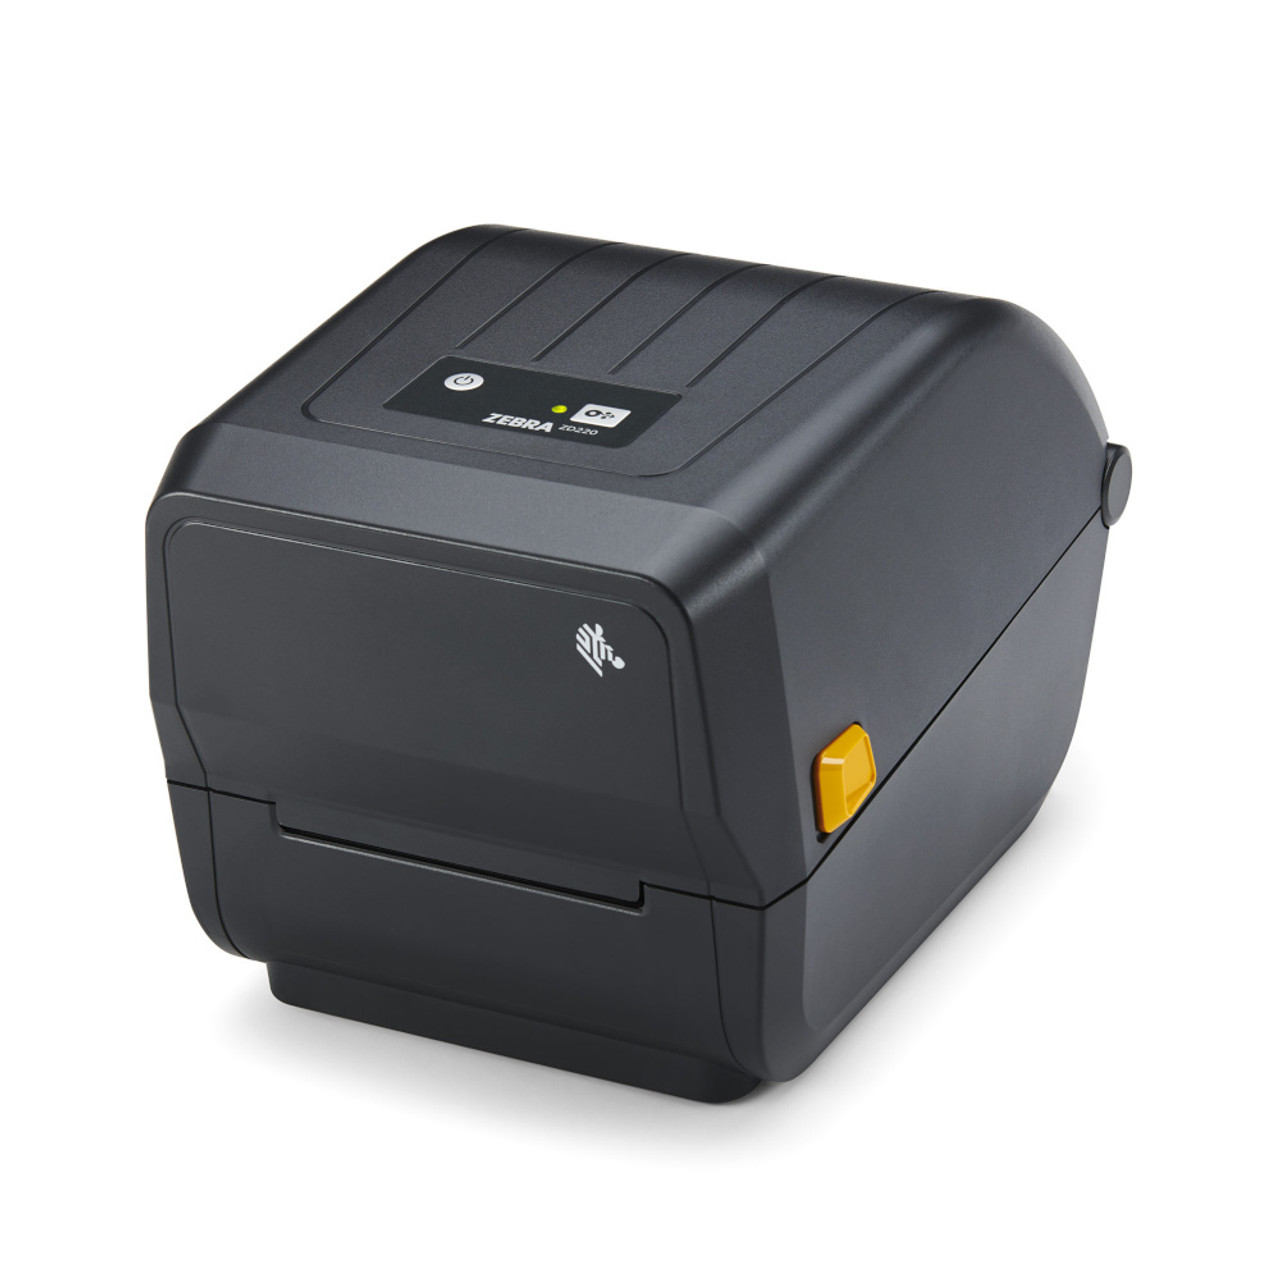 ZEBRA ZD421 Direct Thermal Desktop Printer 203 dpi Print Width 4-inch Features Wired USB and 802.11ac Connectivity ZD4A042-D01W01EZ, No Thermal Ribbon - 4